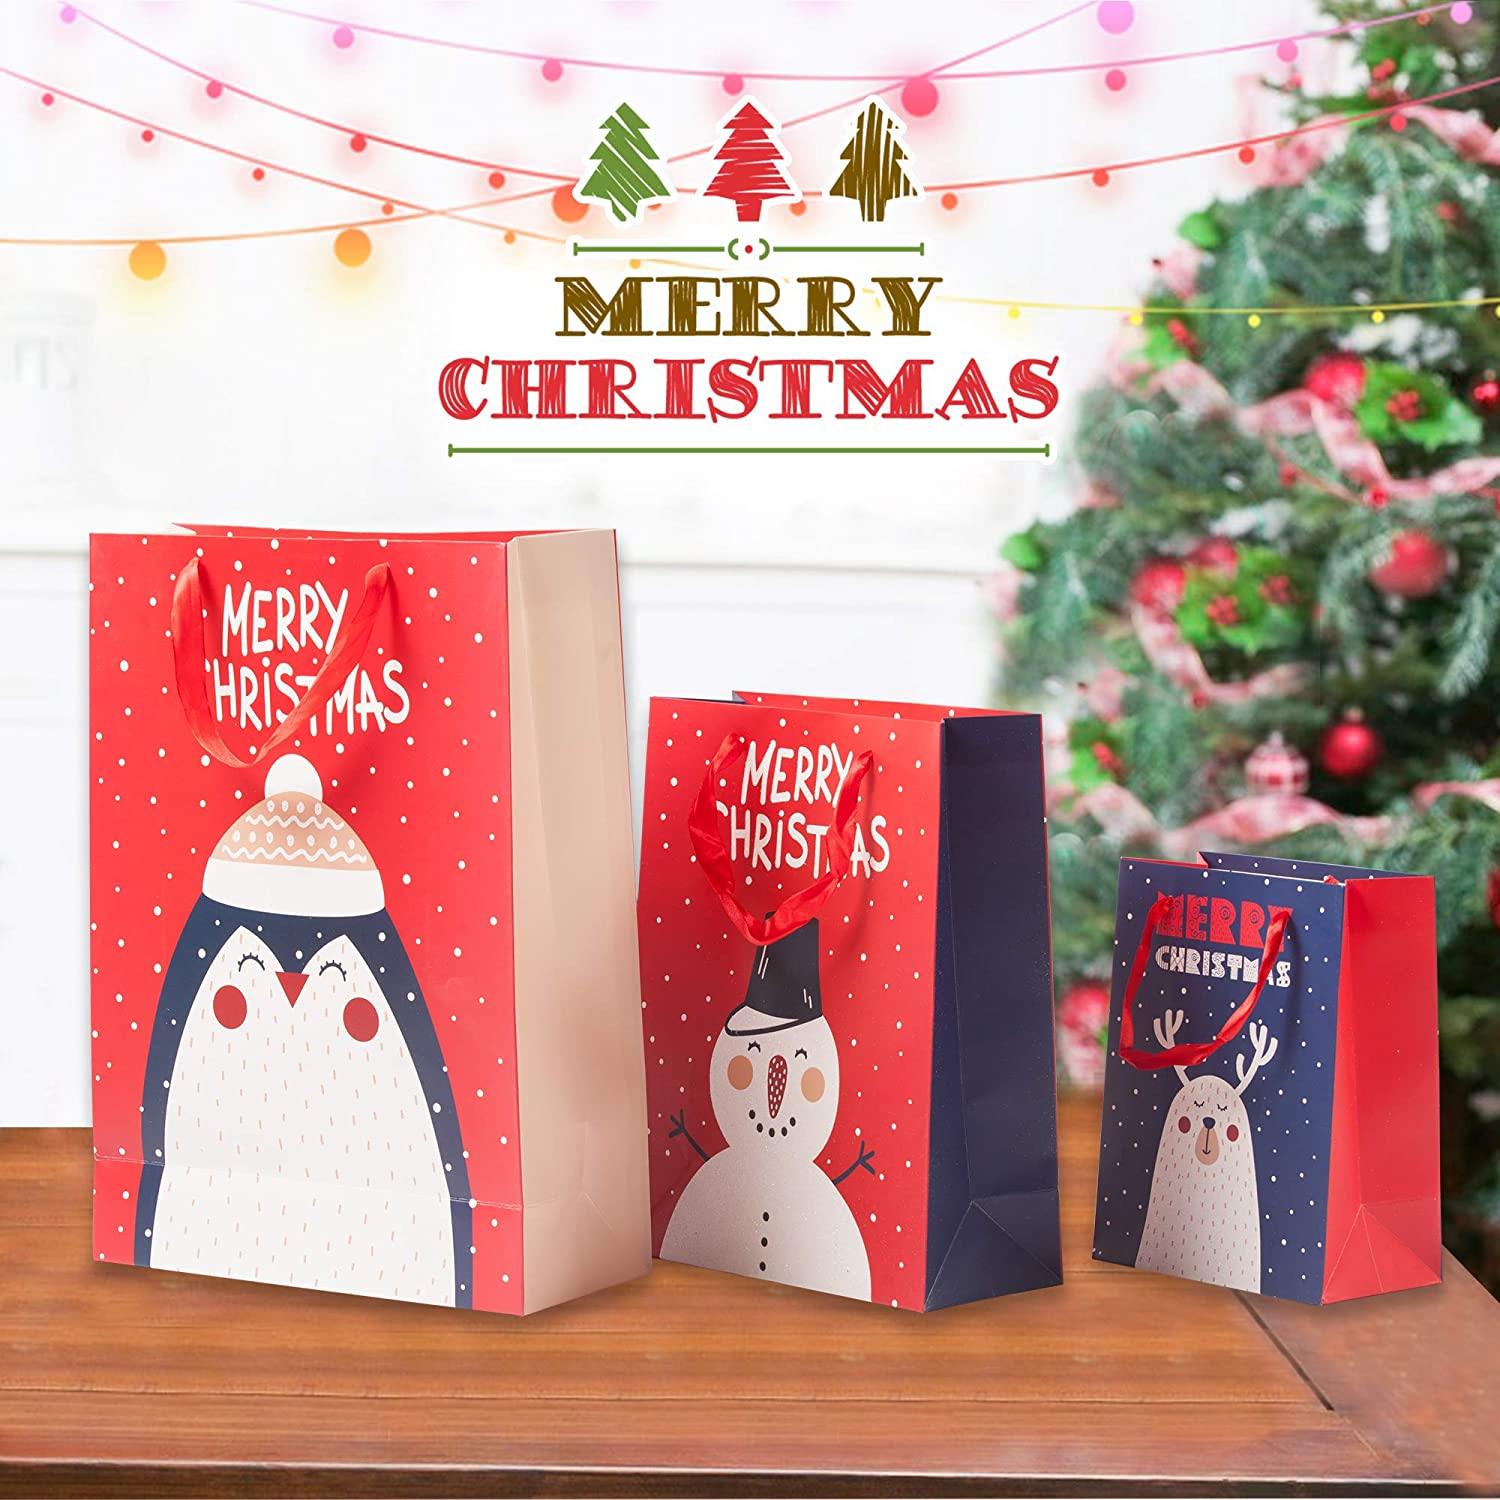 12 Pack Assorted Christmas Gift Bags with Small Medium Large Size, 4 Xmas Pattern Holiday Gift Bags with Tissue Paper, Colorful with Glitter - Bosonshop